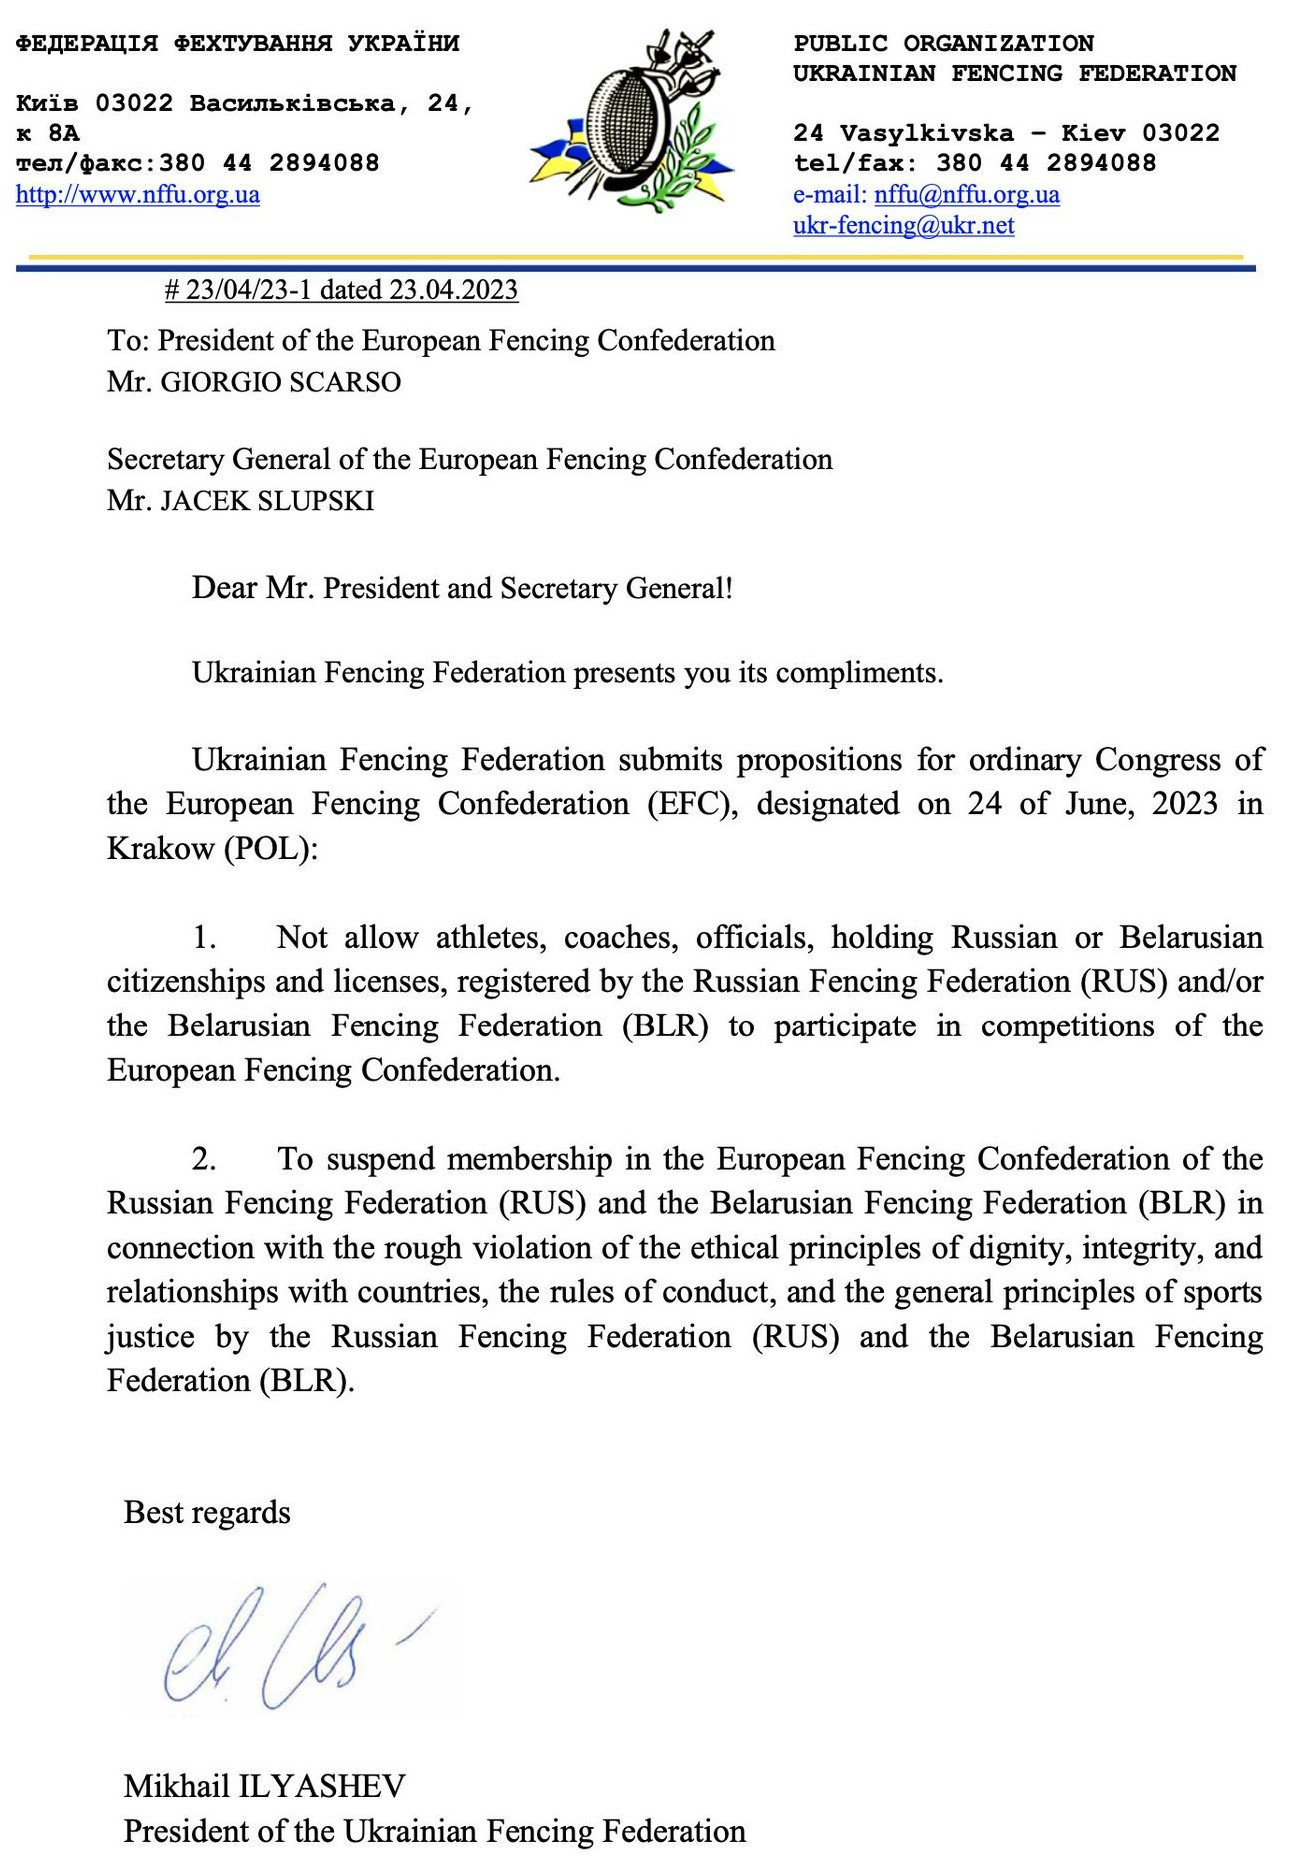 The EFC passed two motions proposed by Ukrainian Fencing Federation President Mikhail Ilyashev at its Congress ©ITG